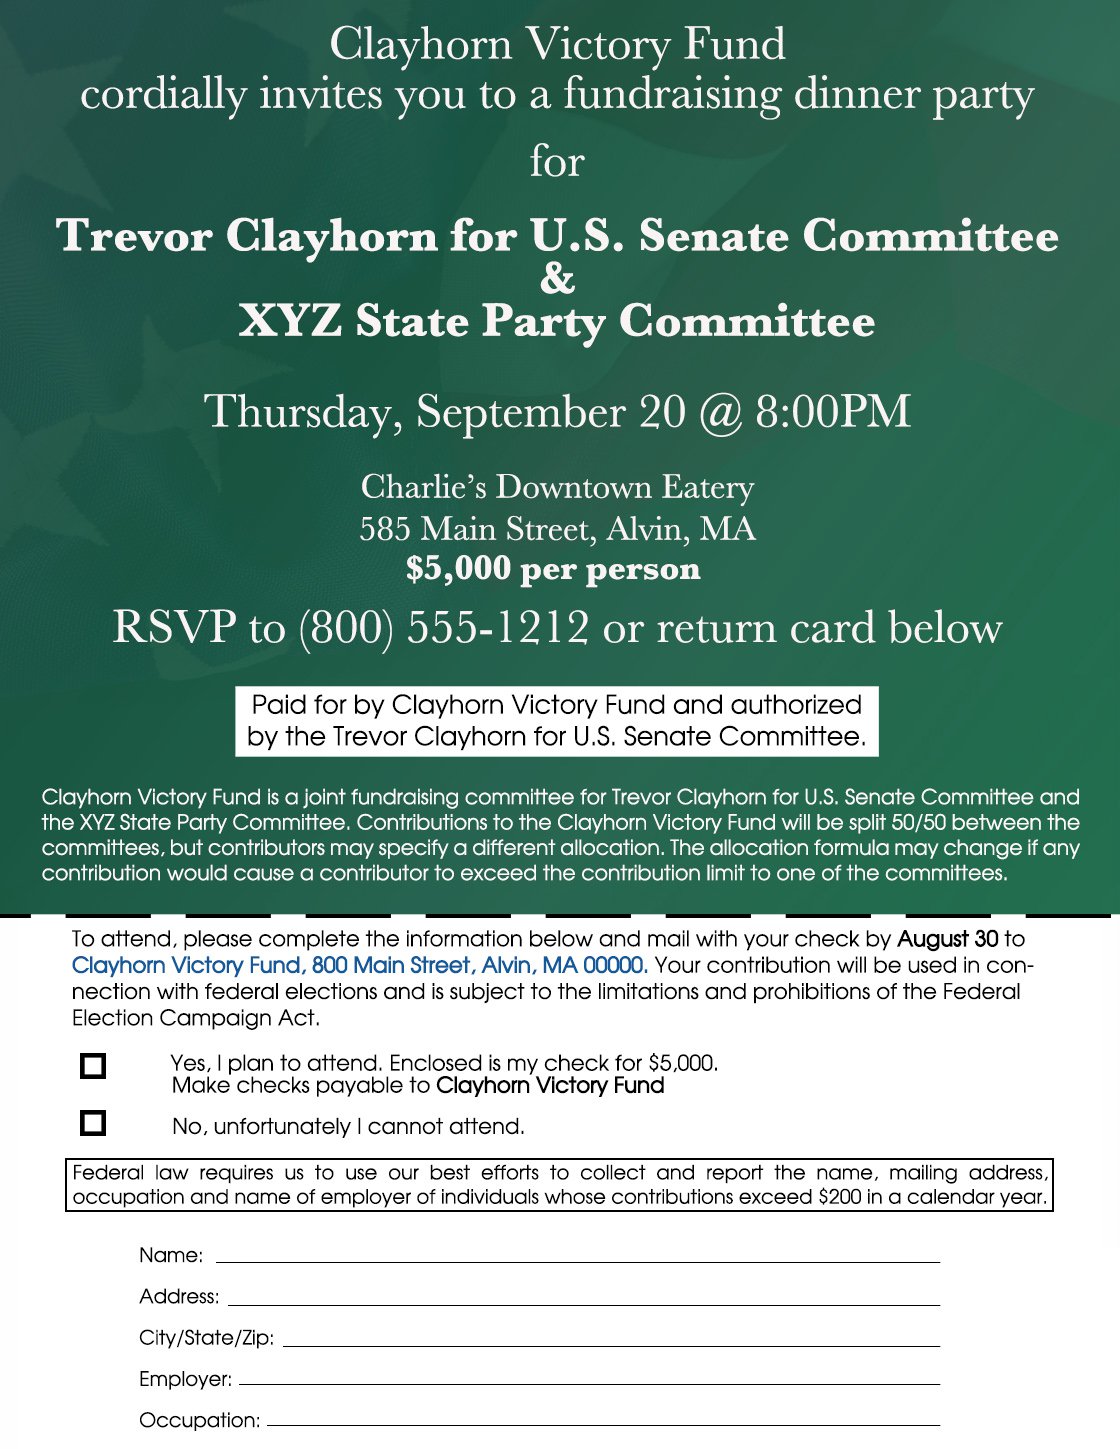 Image of a disclaimer example of an Invitation for Joint Fundraiser between a federal candidate and state party committee